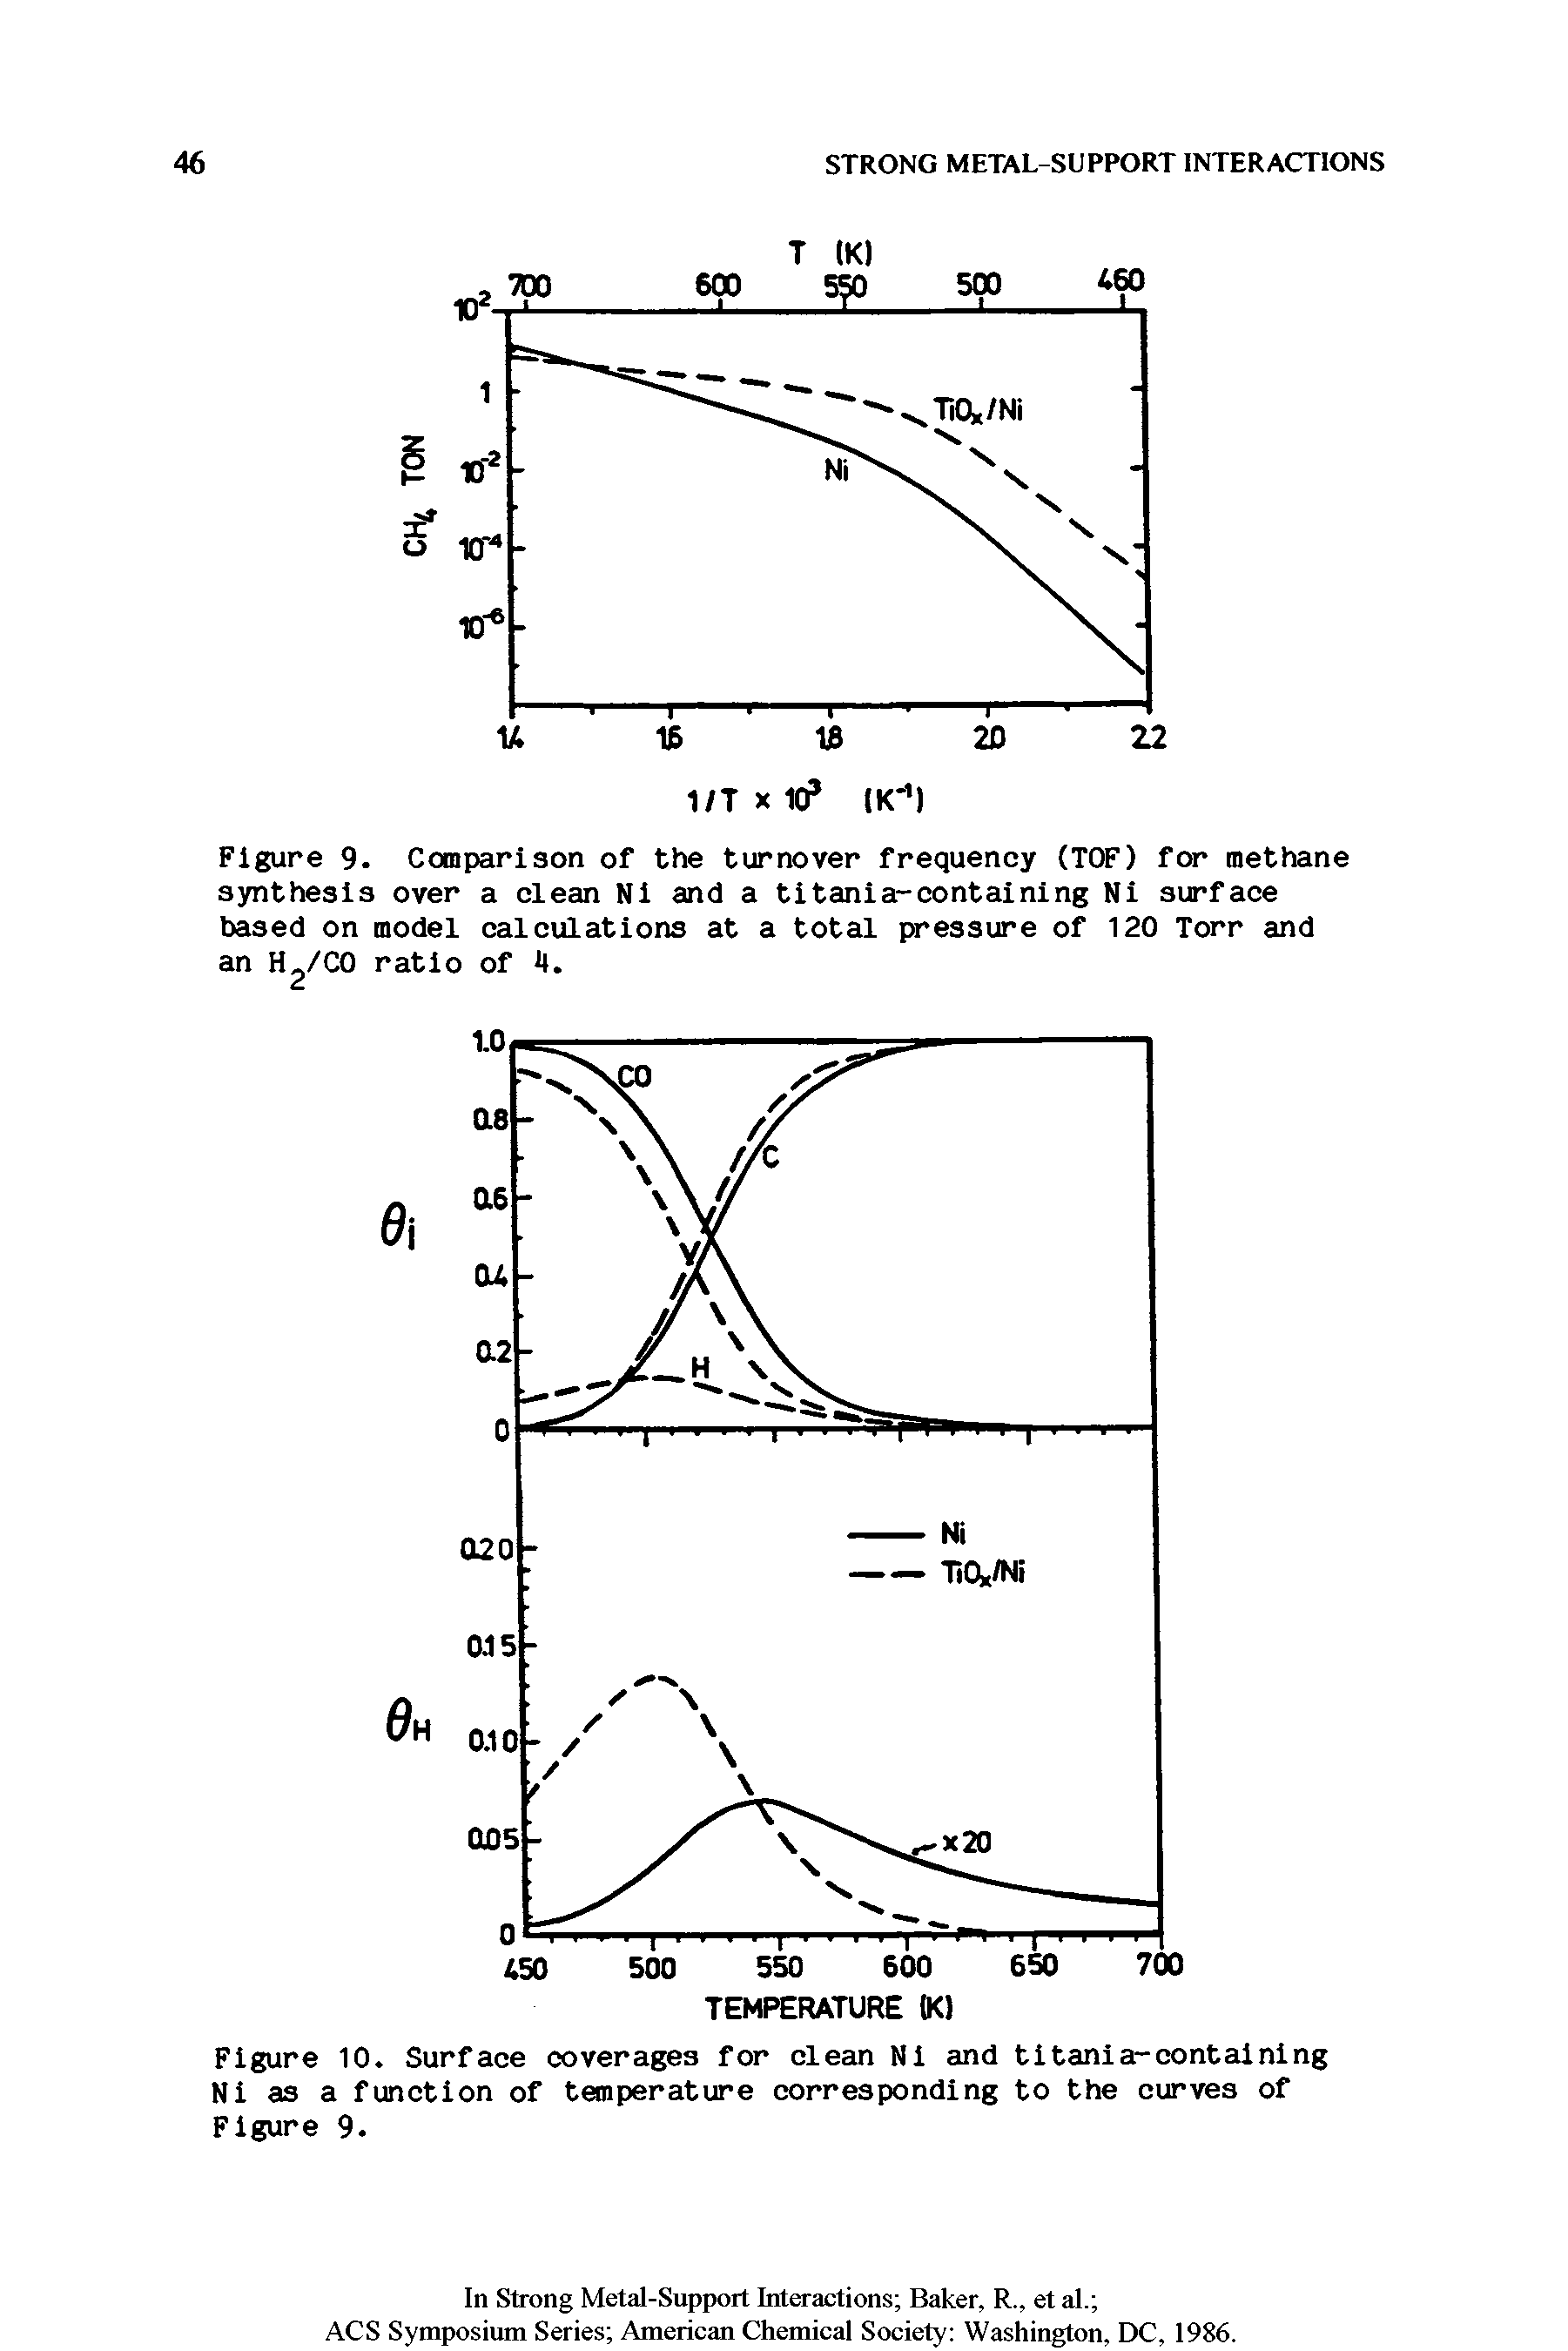 Figure 10. Surface coverages for clean Ni and titania-containing Ni as a function of temperature corresponding to the curves of Figure 9.